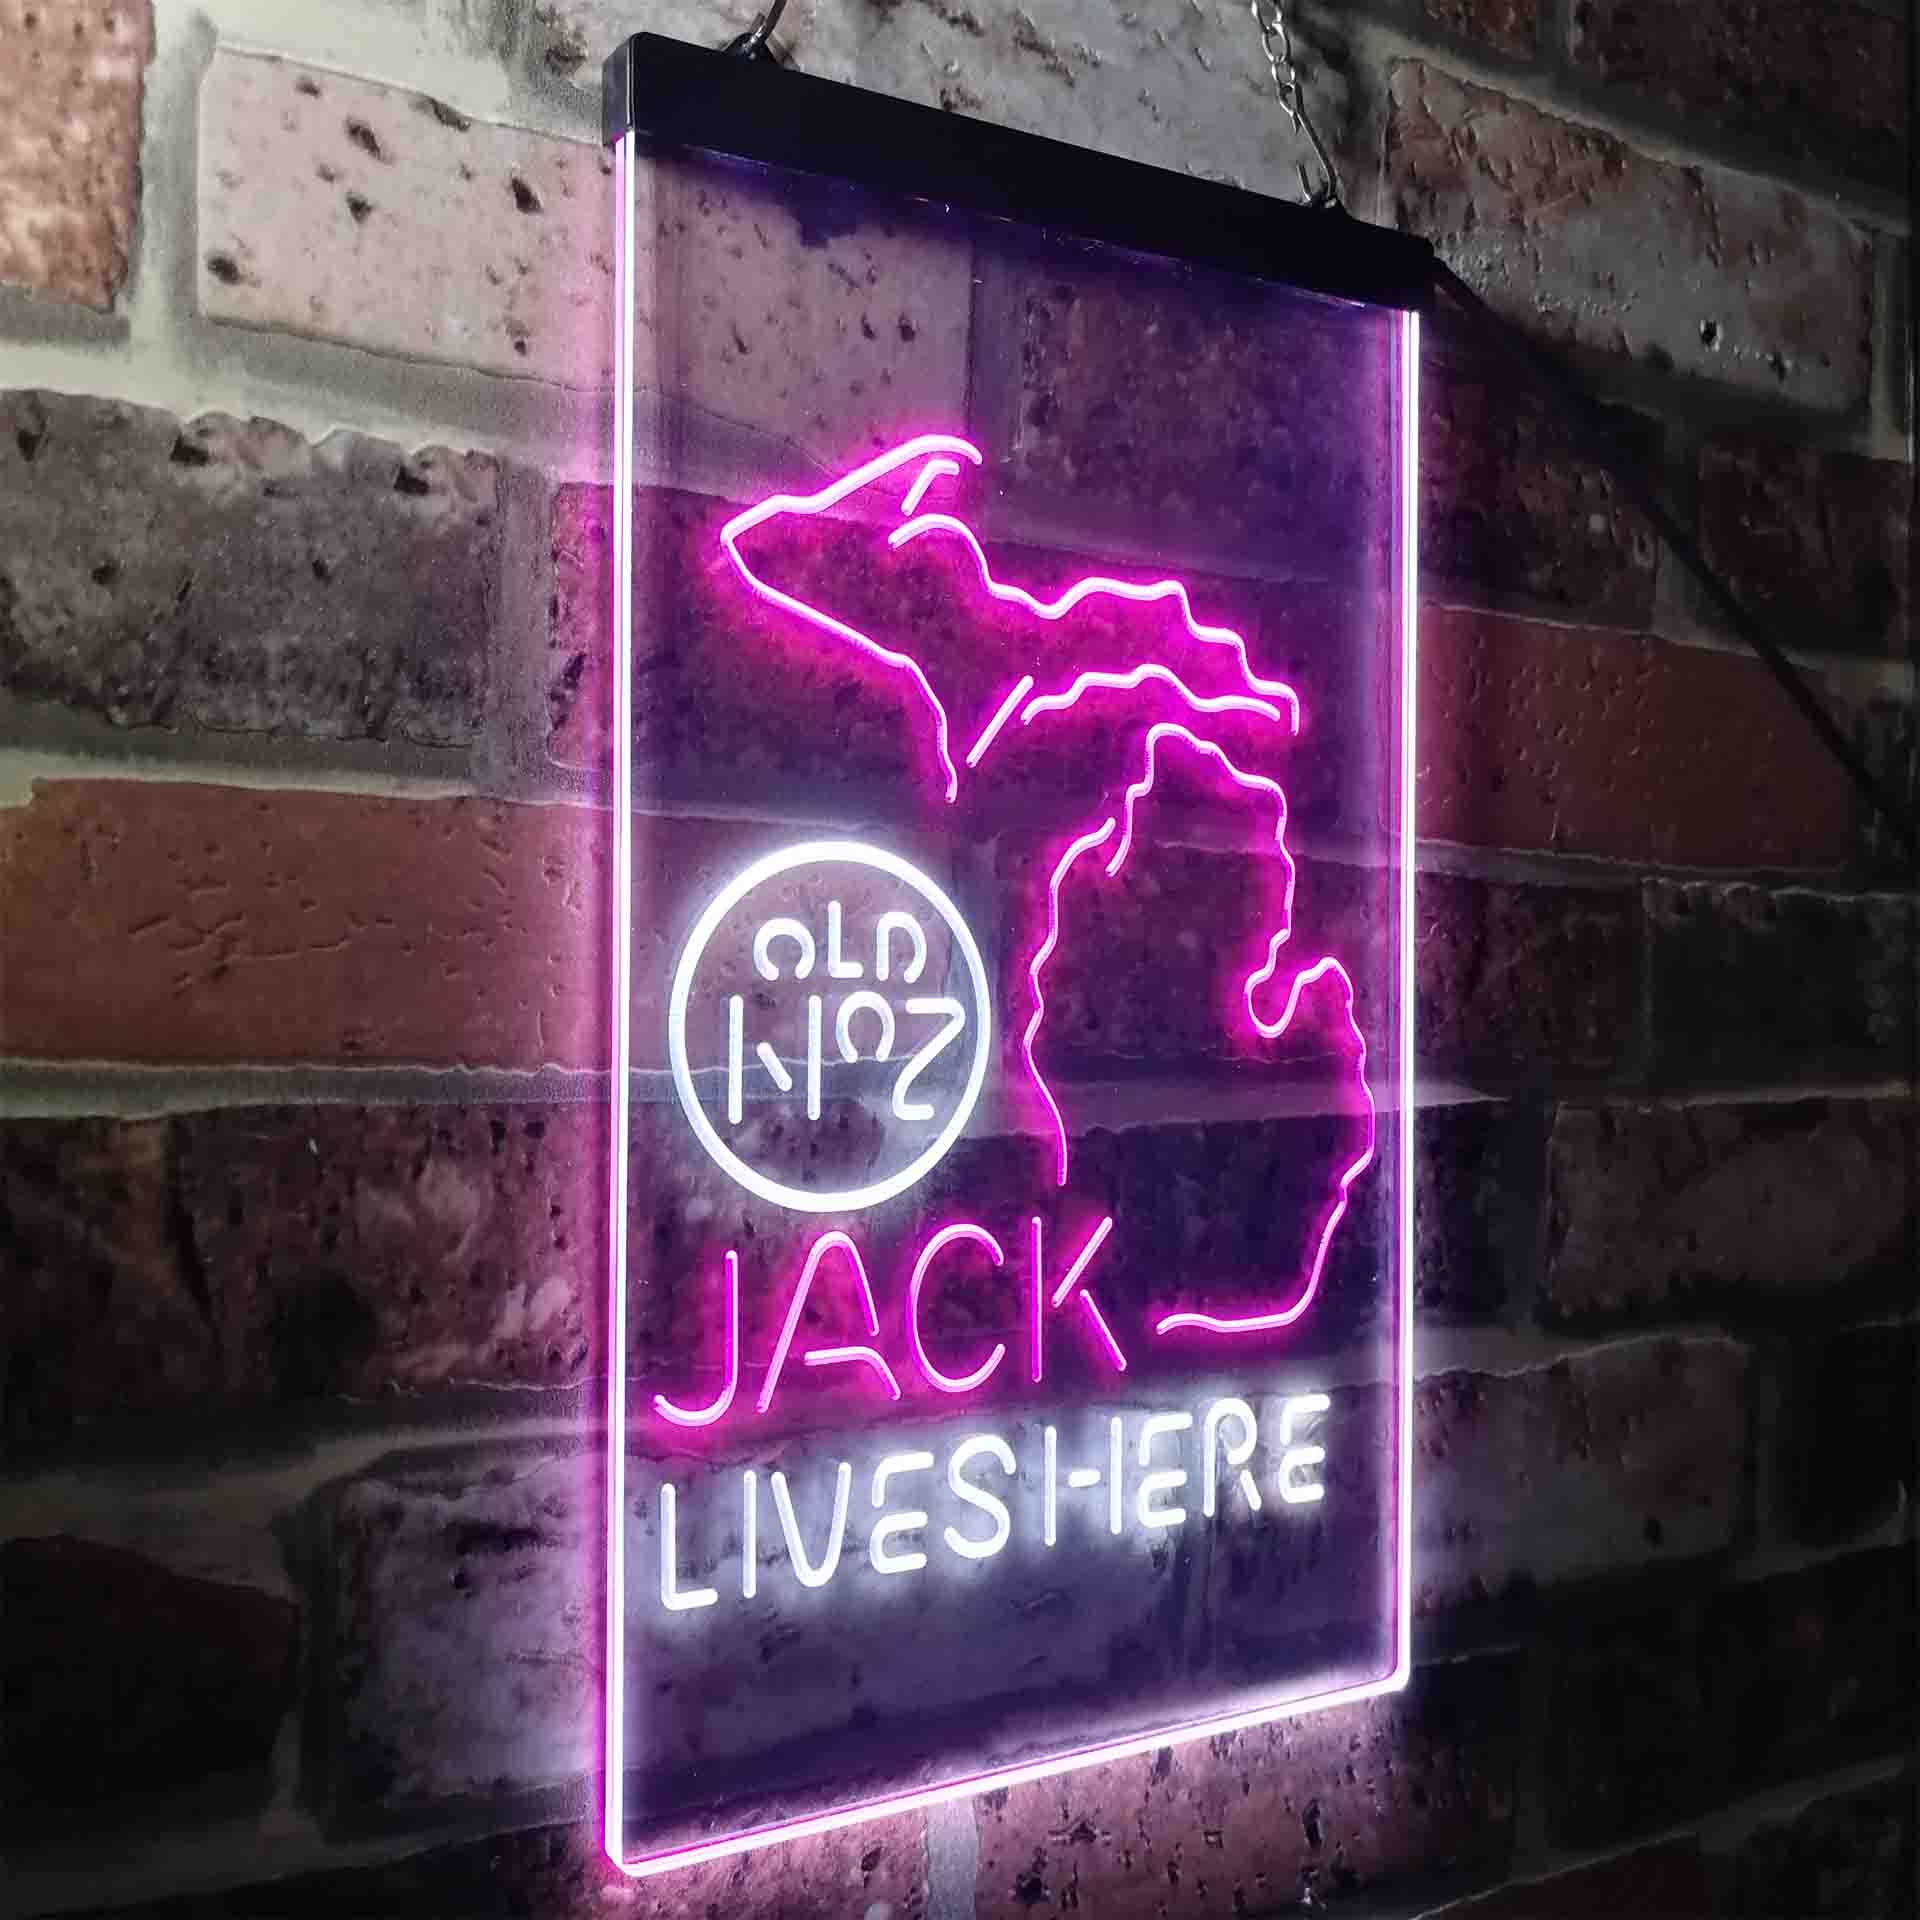 Michigan Jack Lives Here Neon LED Sign